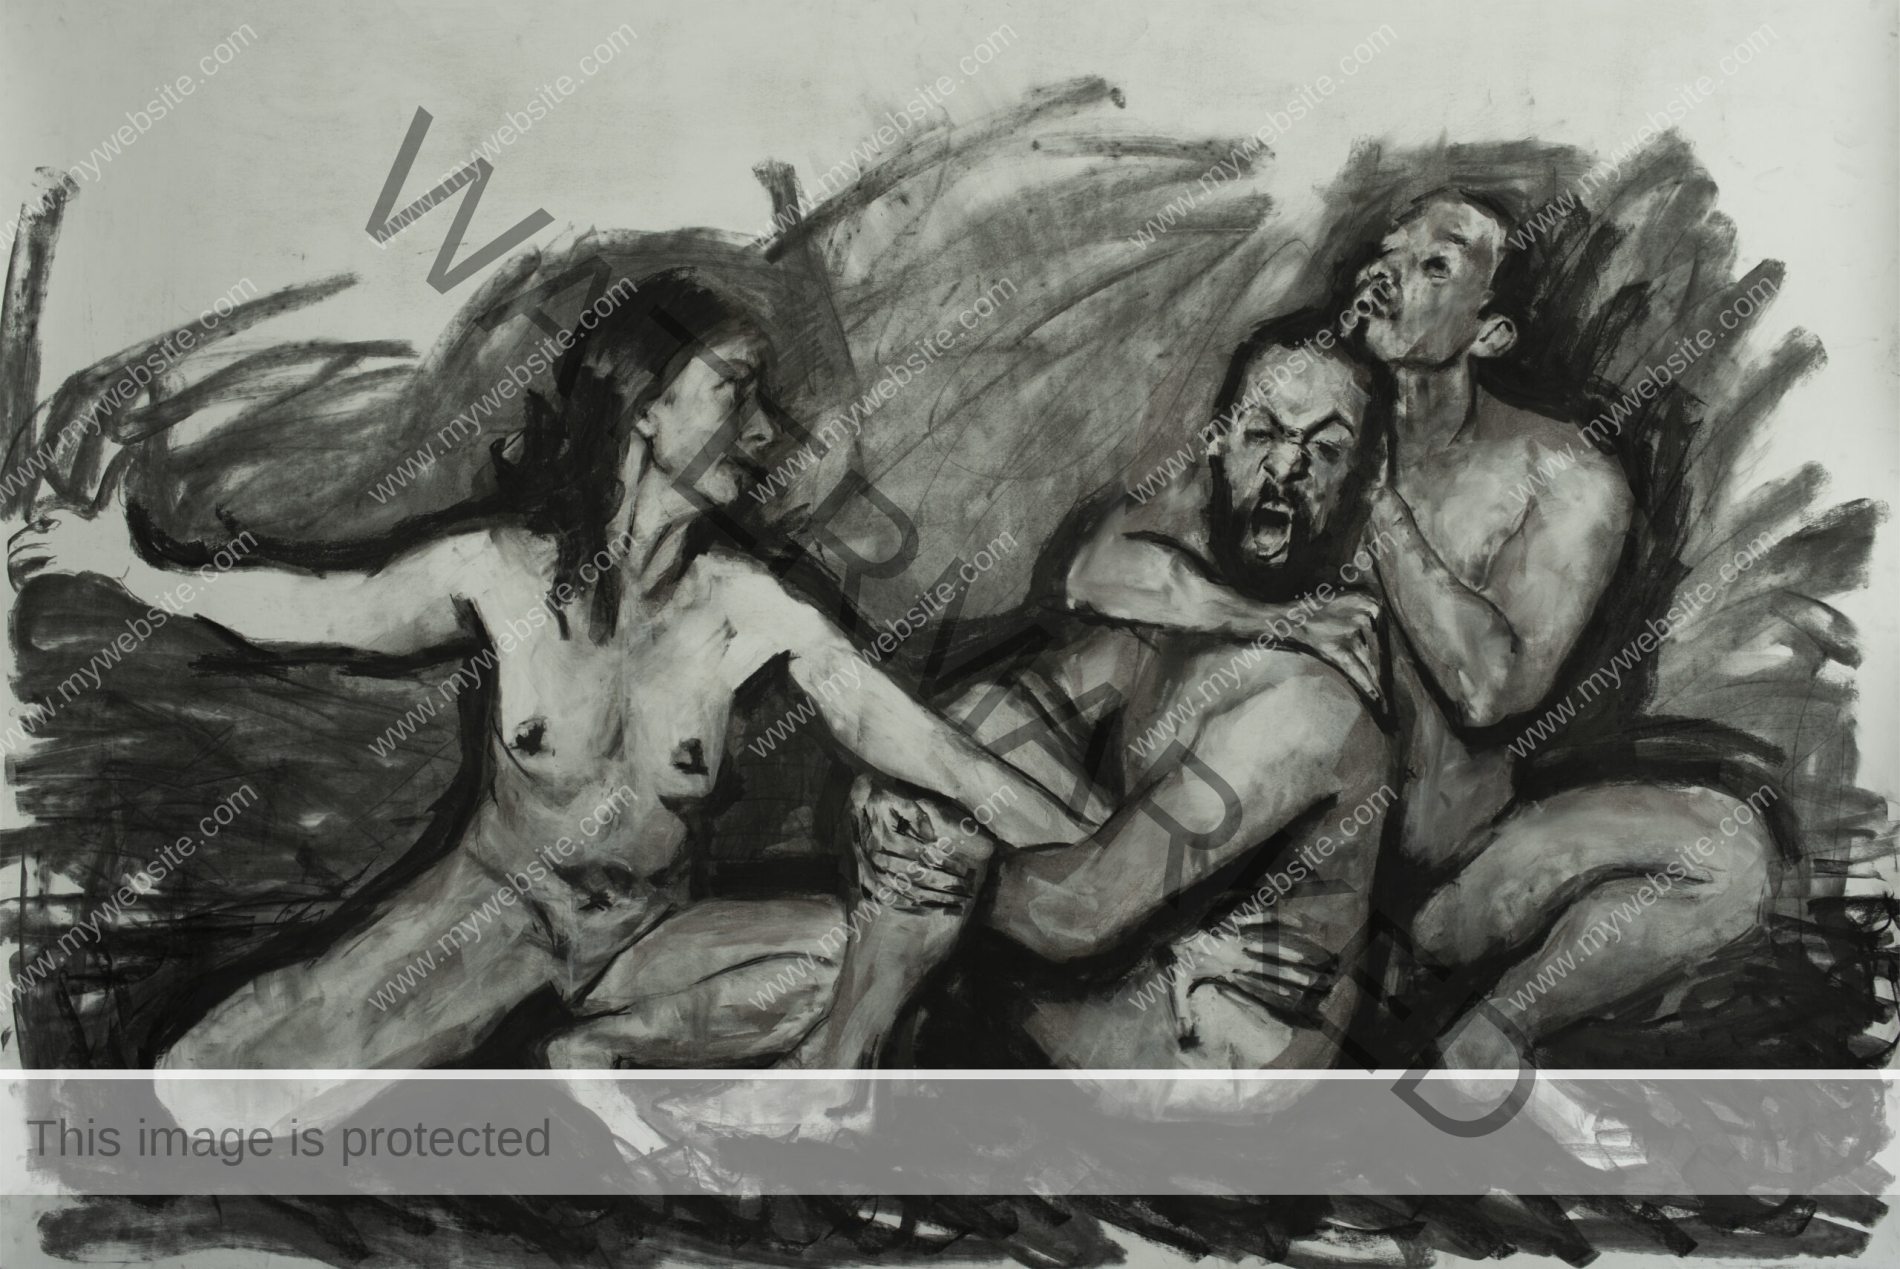 Charcoal drawing from Roberto Murillo's figurative Couplings series, featuring a 3 nude adults in a tussle. desavenencia drawing.